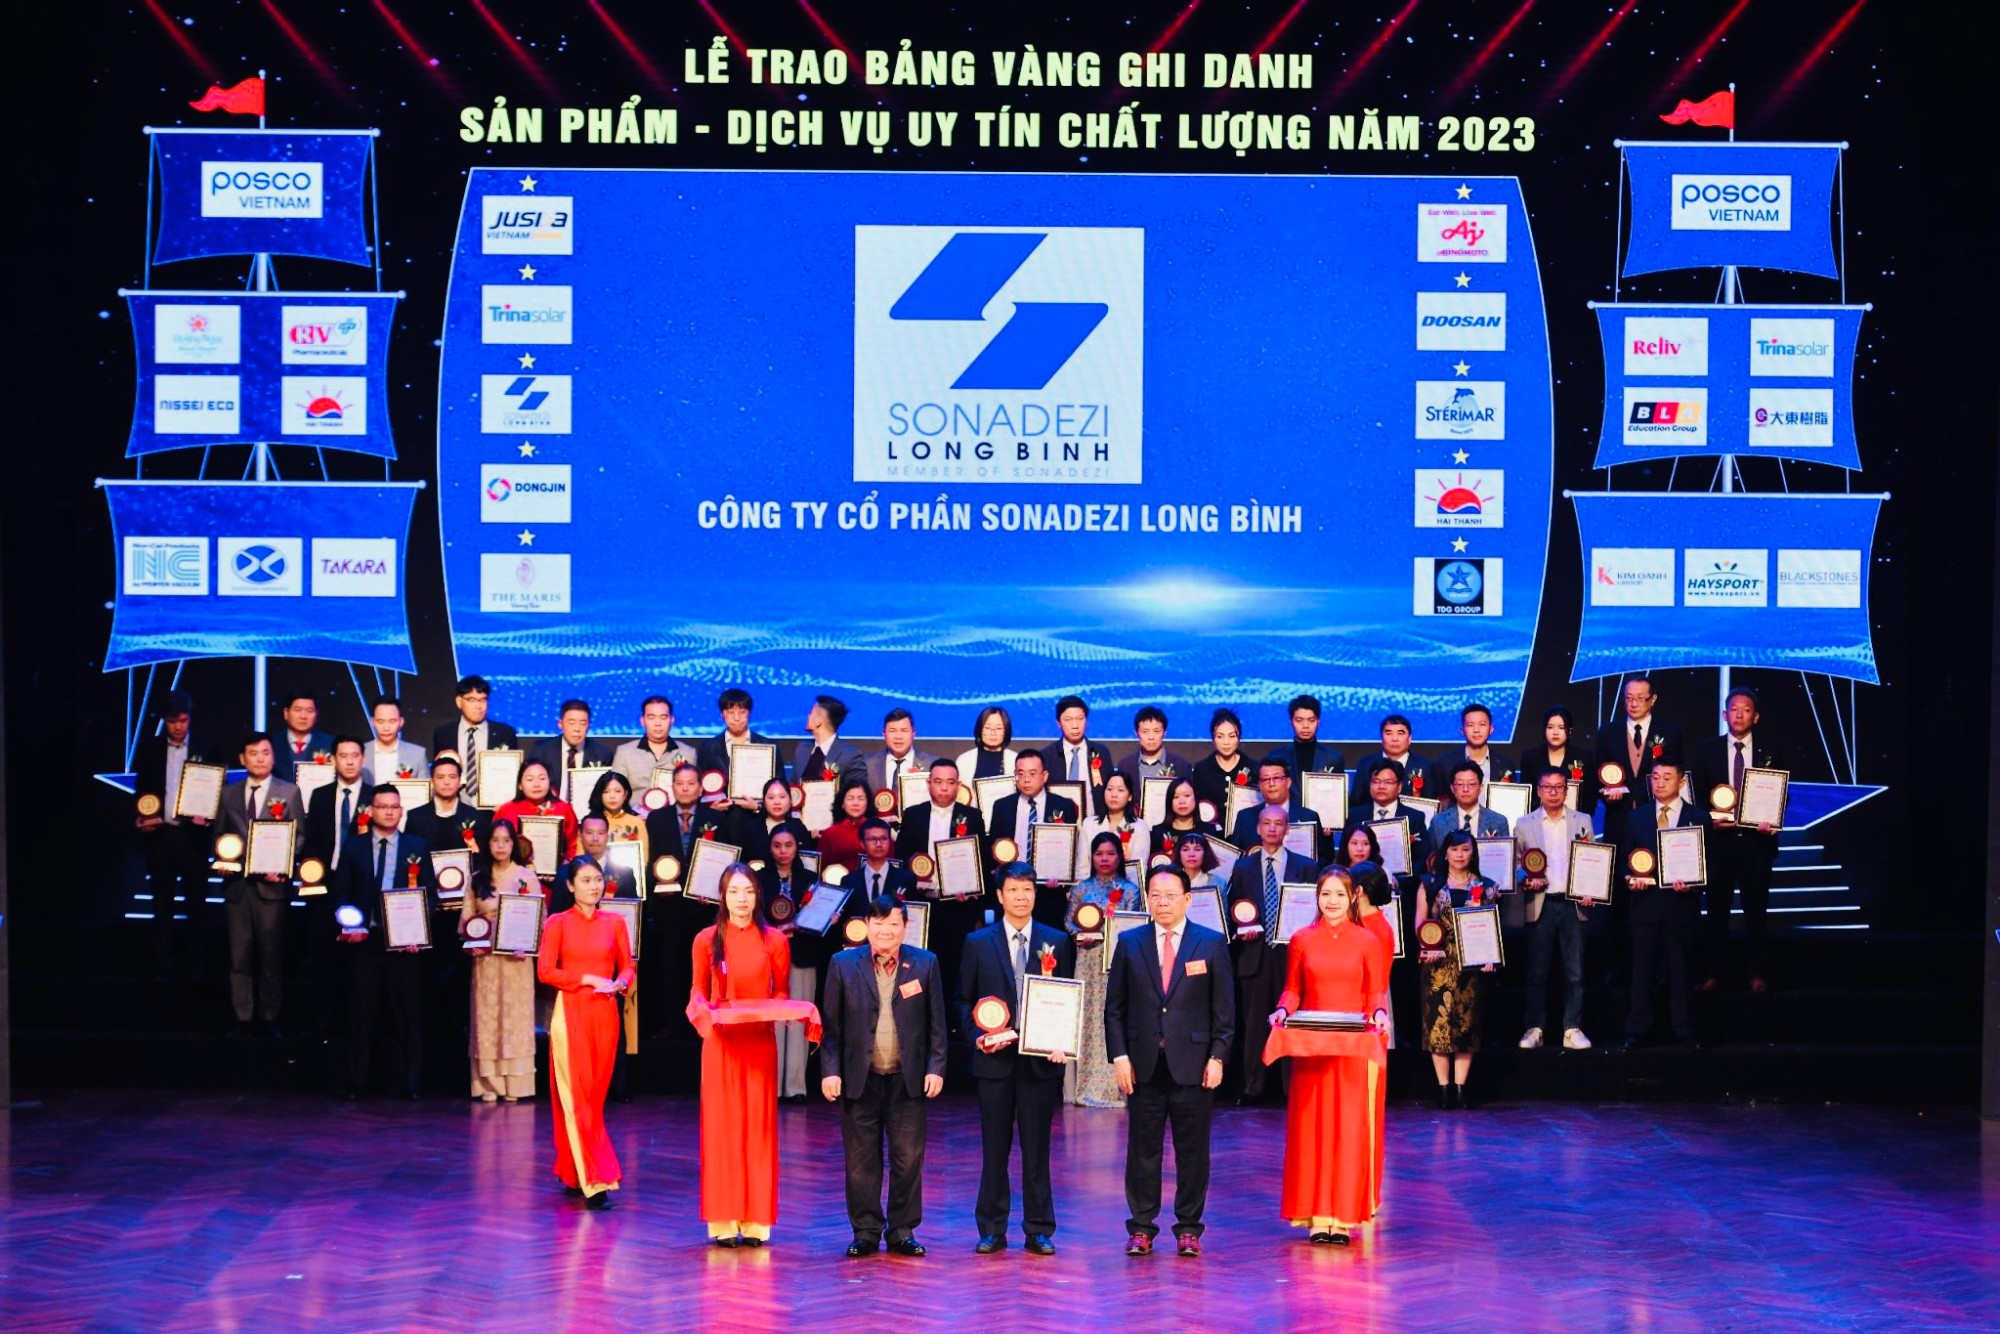 Sonadezi Long Binh received the Top 10 Prestigious and Quality Services award in 2023 and honored Outstanding Entrepreneur in 2023